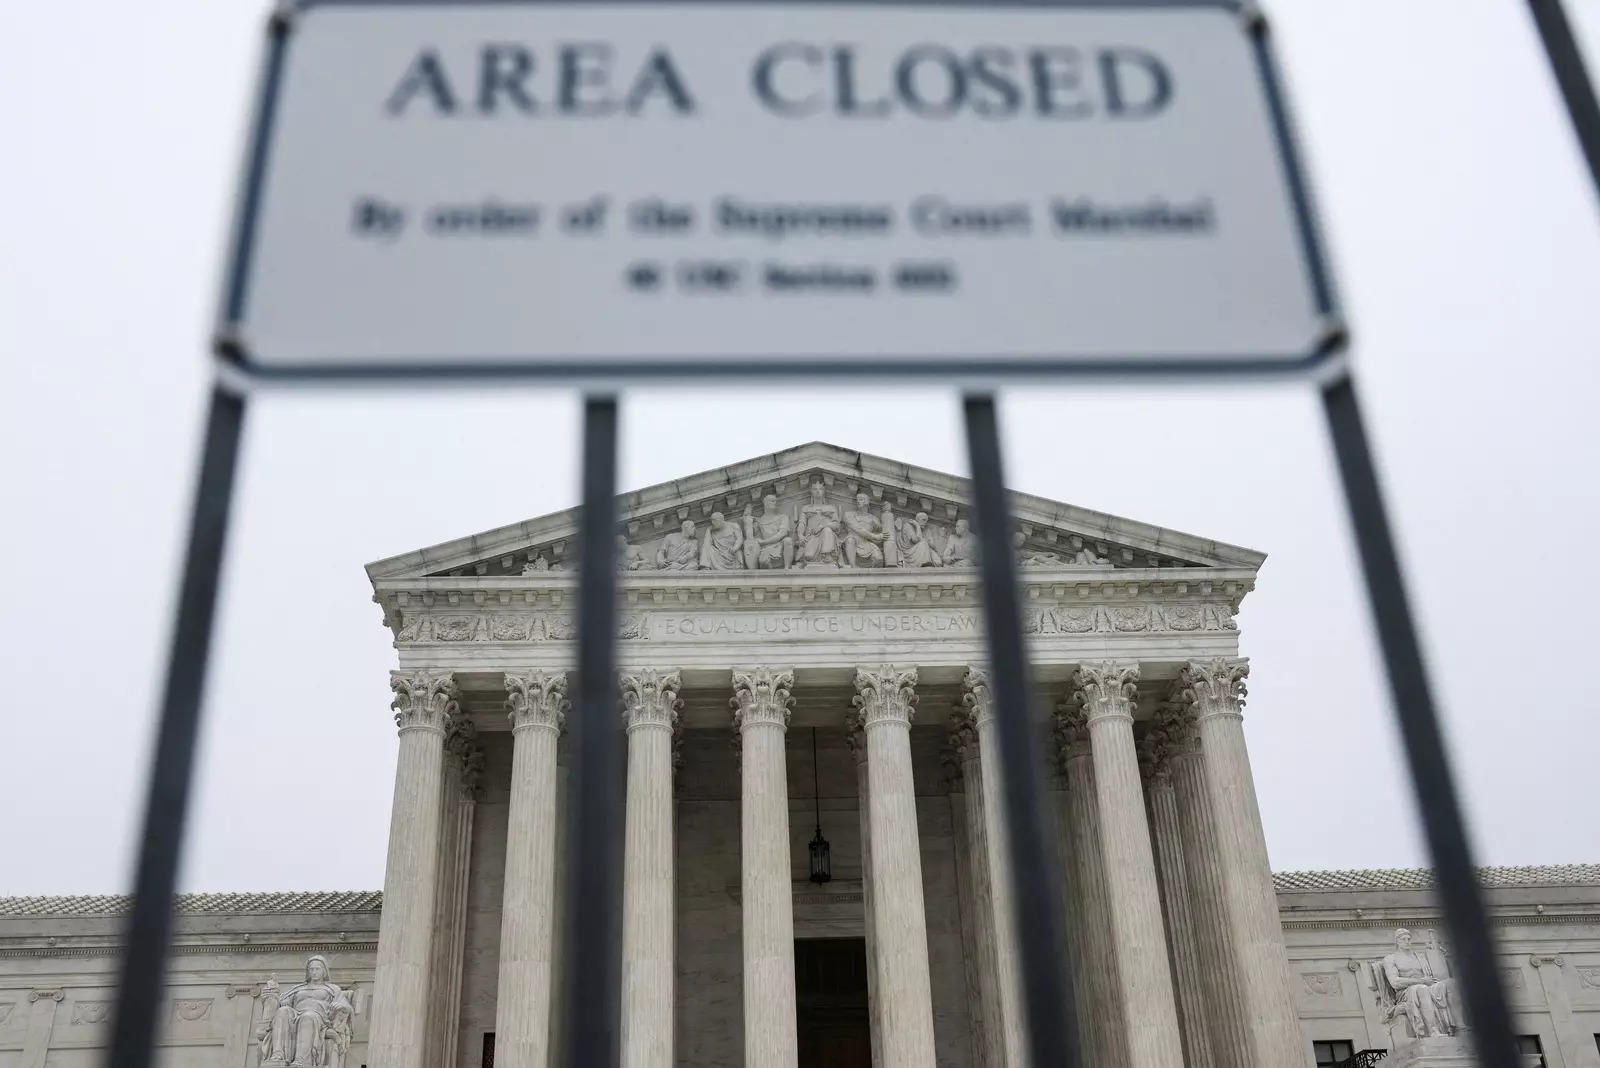  A sign is seen outside the U.S. Supreme Court after the leak of a draft majority opinion written by Justice Samuel Alito preparing for a majority of the court to overturn the landmark Roe v. Wade abortion-rights decision later this year, in Washington, U.S., May 3, 2022. REUTERS/Evelyn Hockstein